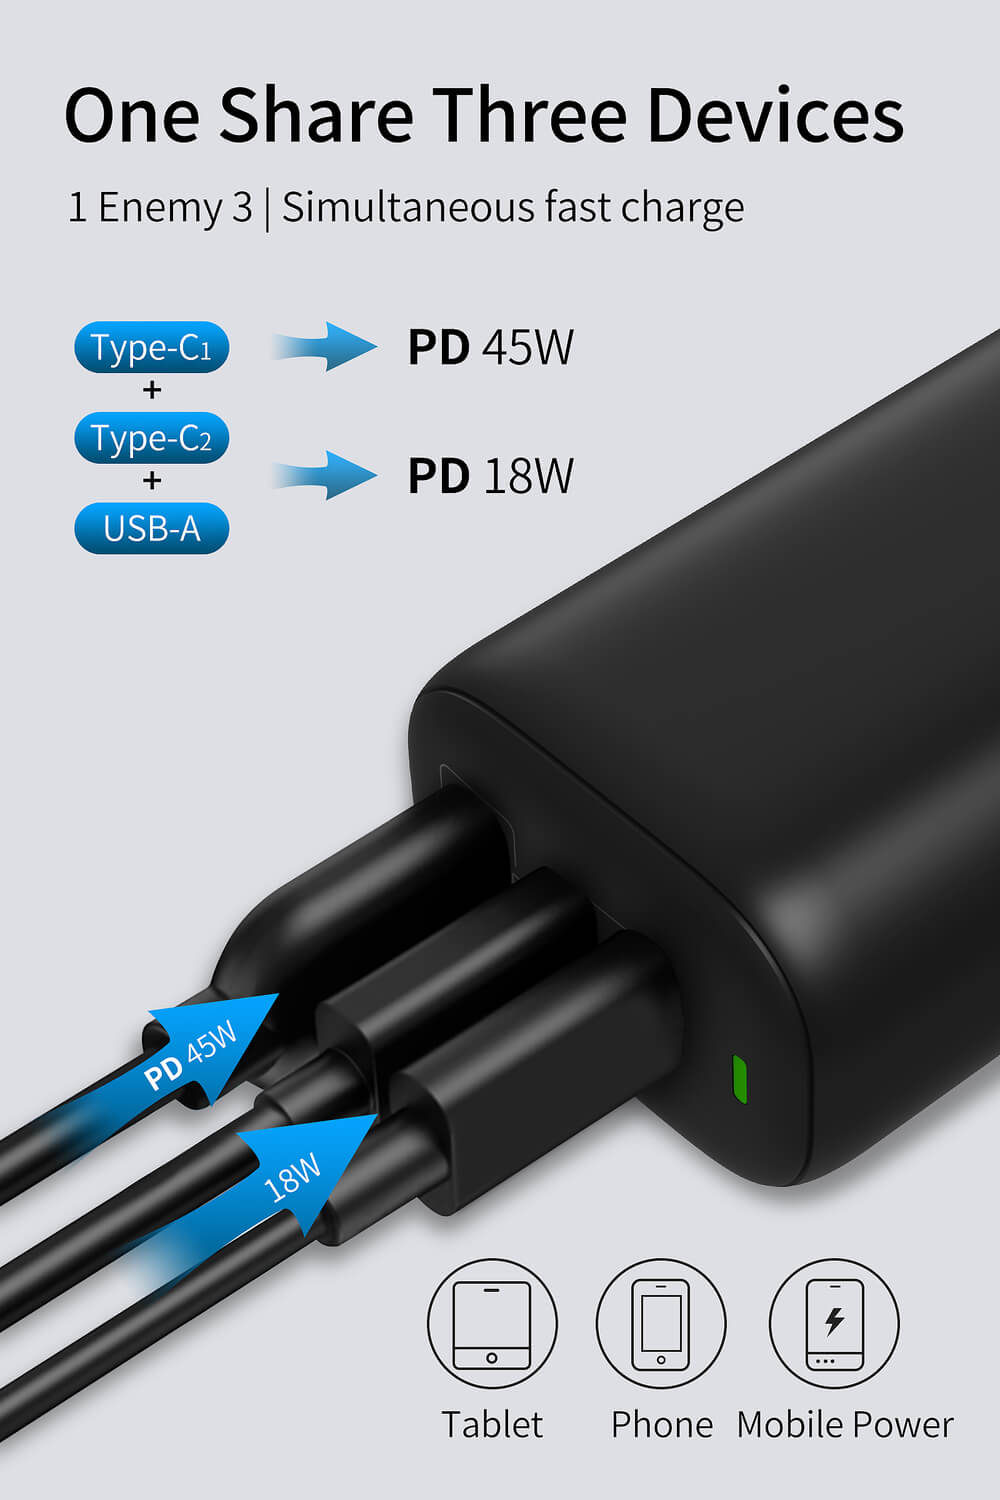 huwder 65watts usb c charger support charge 3 devices at the same time